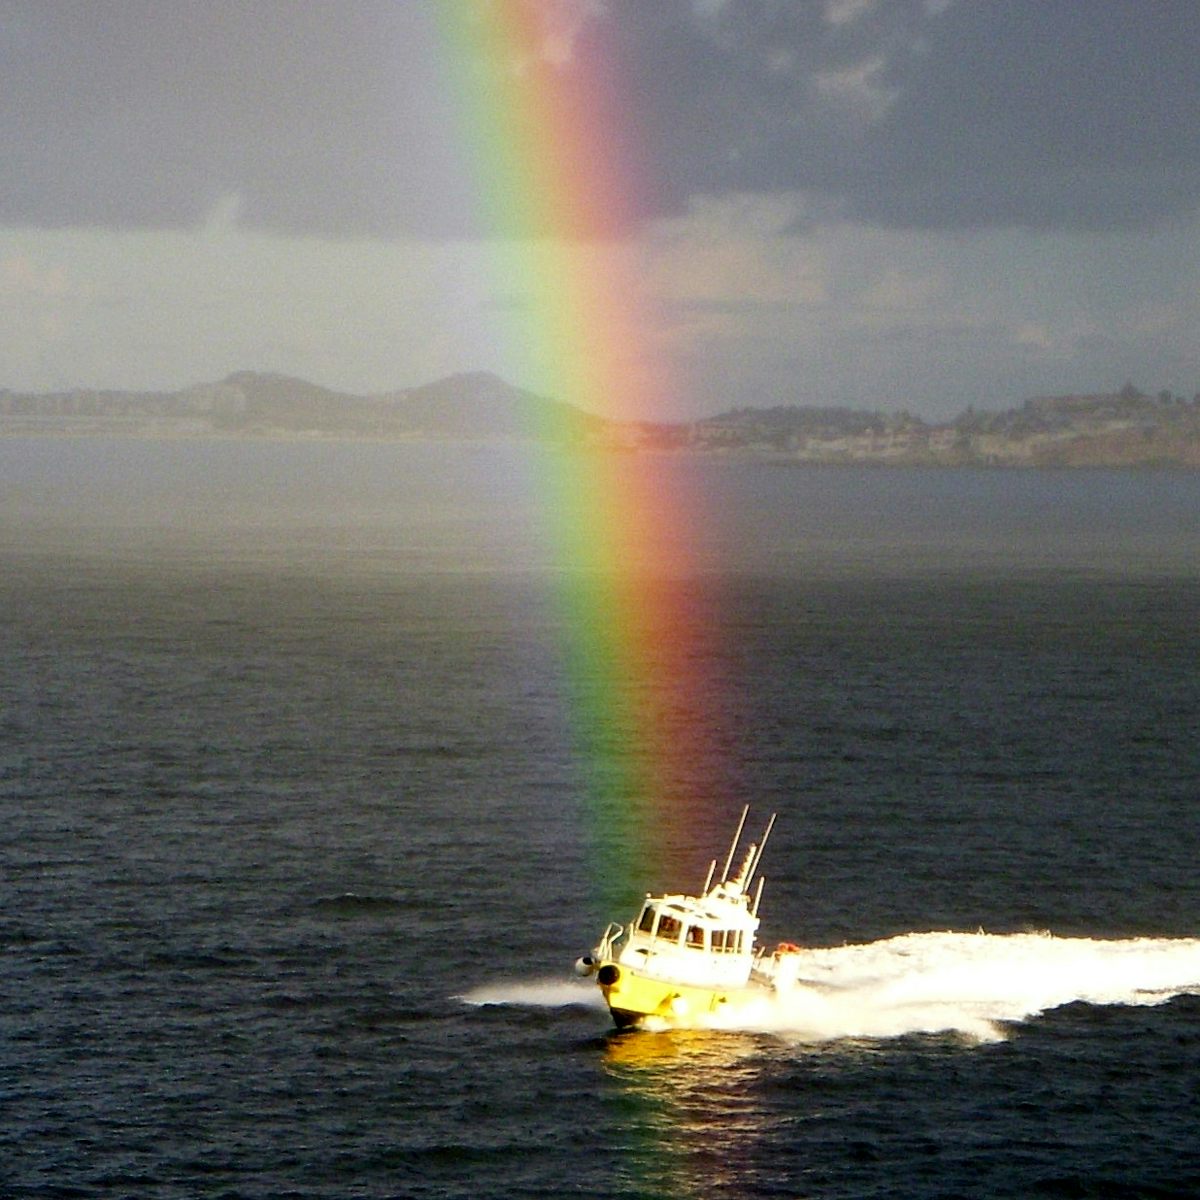 rainbow over the pilot boat - as we entered St. Martin